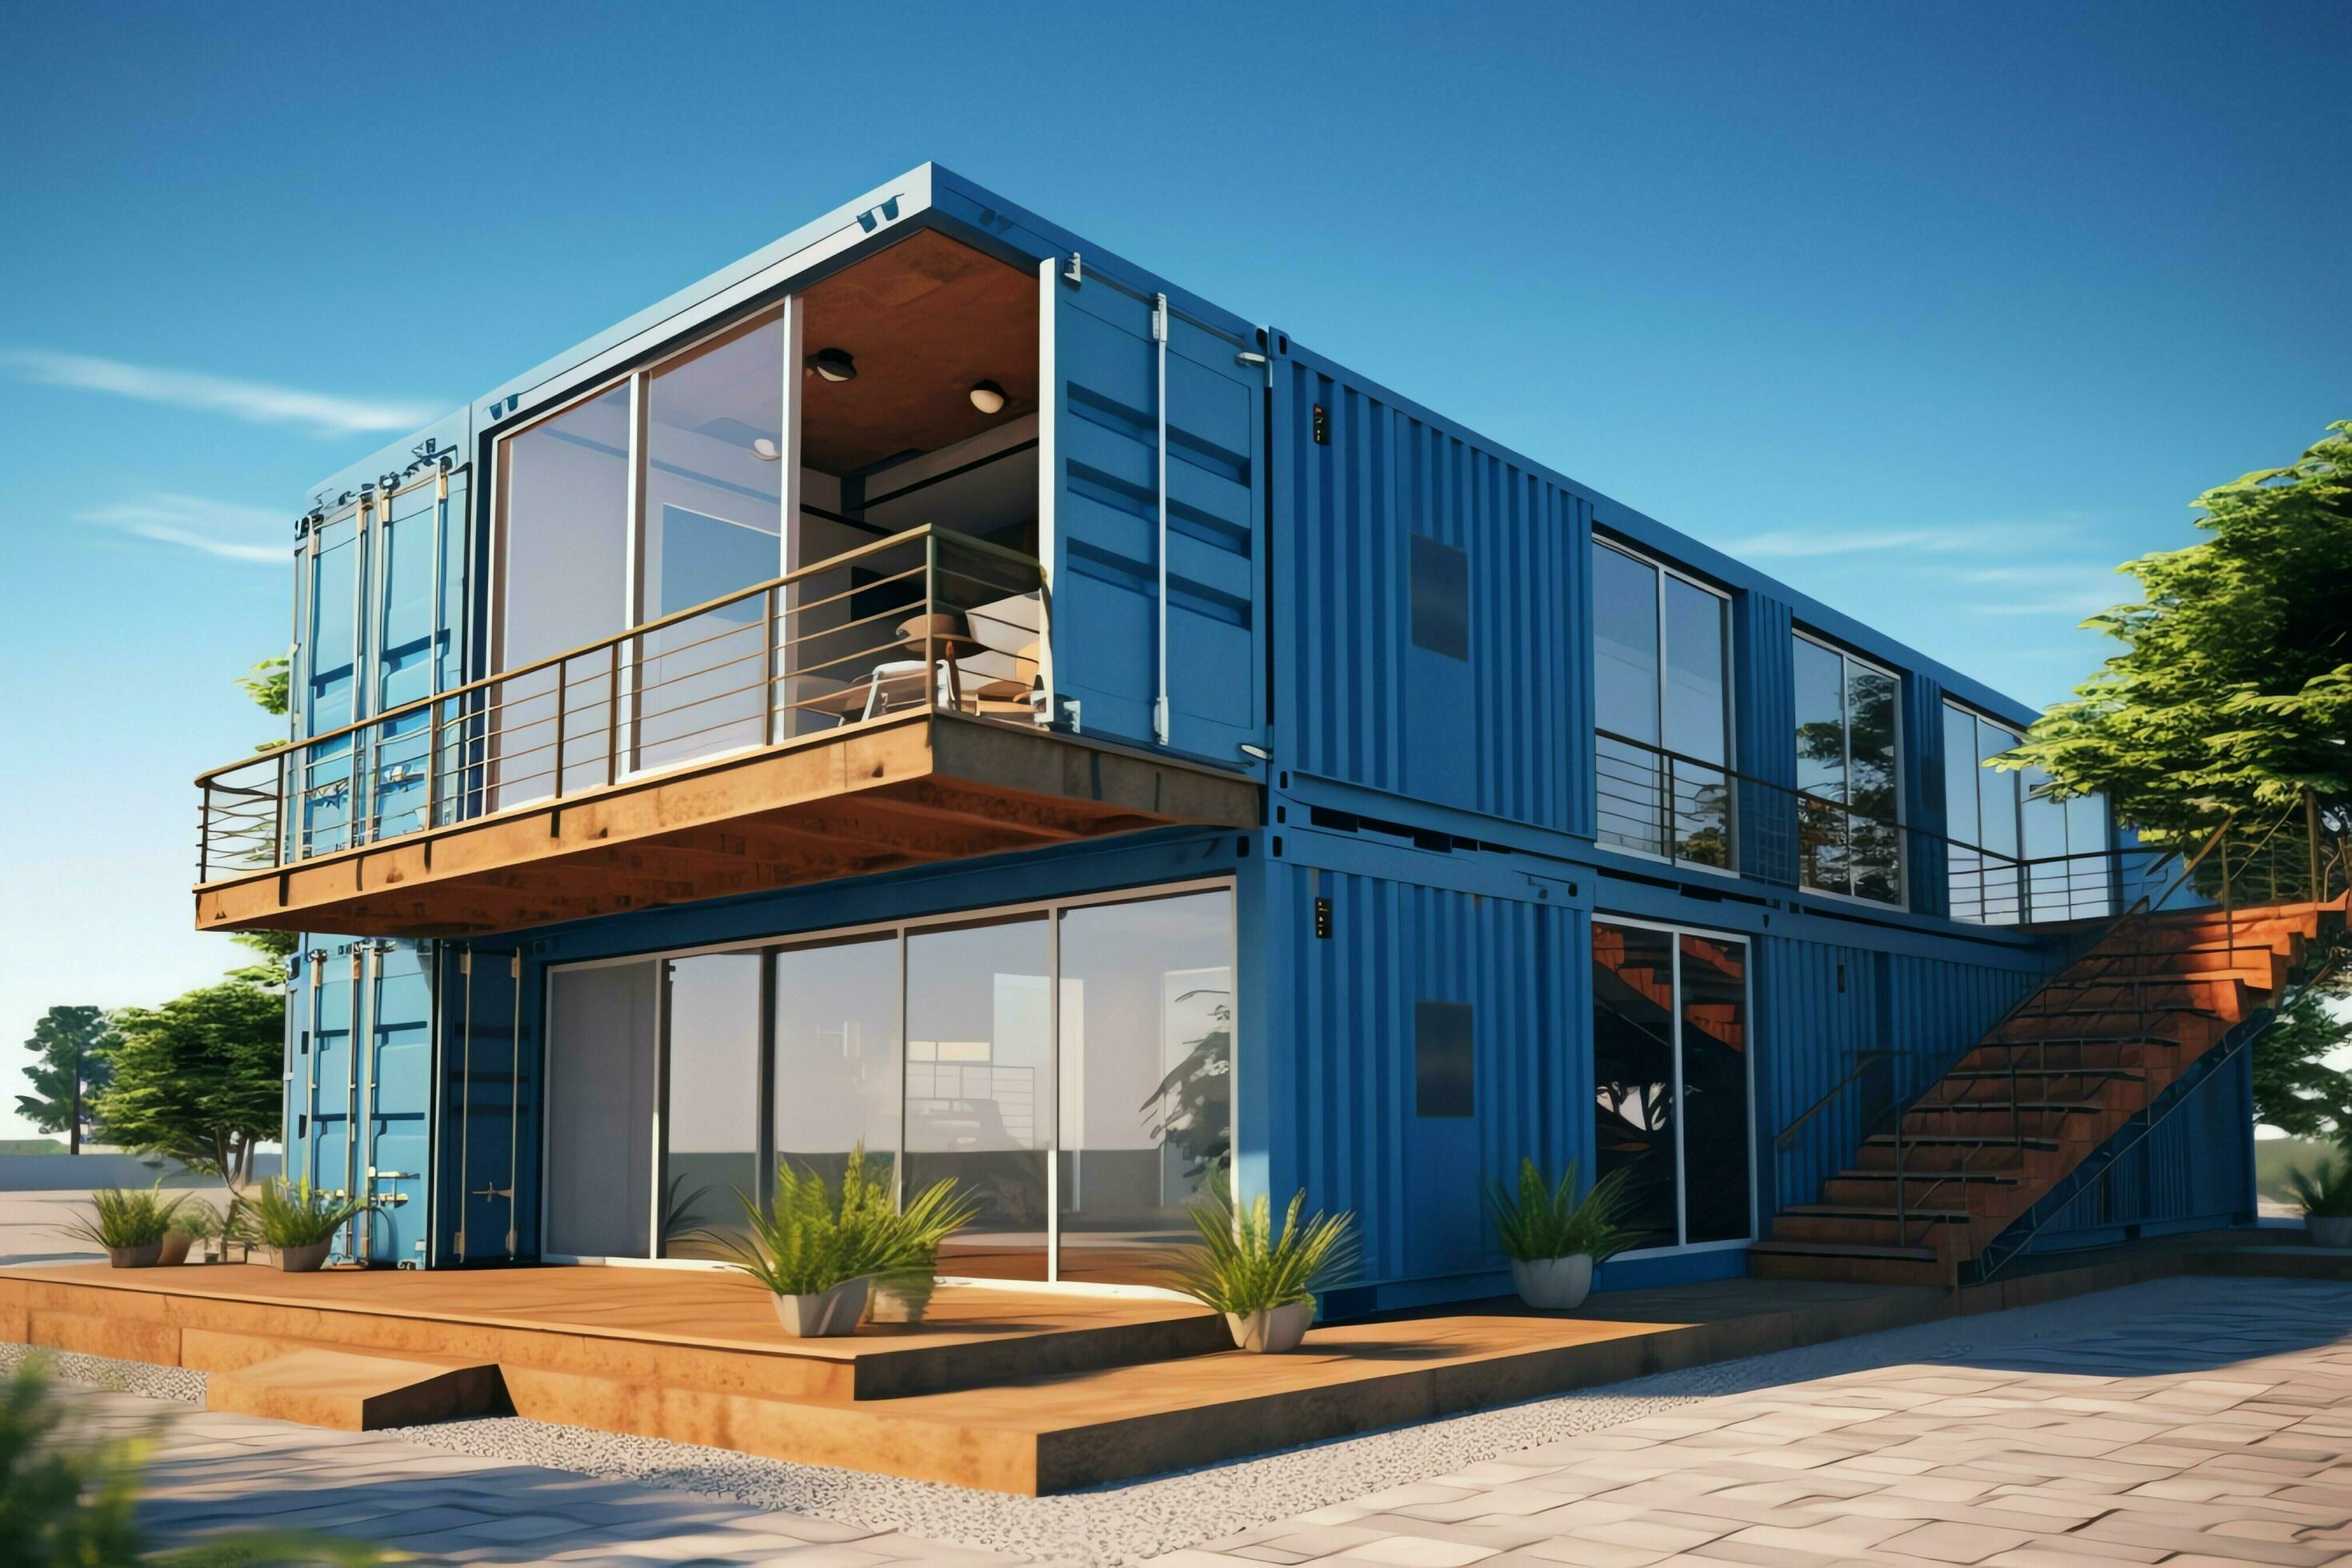 https://static.vecteezy.com/system/resources/previews/031/340/671/large_2x/a-container-home-building-on-a-plot-of-land-2-storey-modern-container-house-cafe-or-restaurant-concept-by-ai-generated-free-photo.jpg